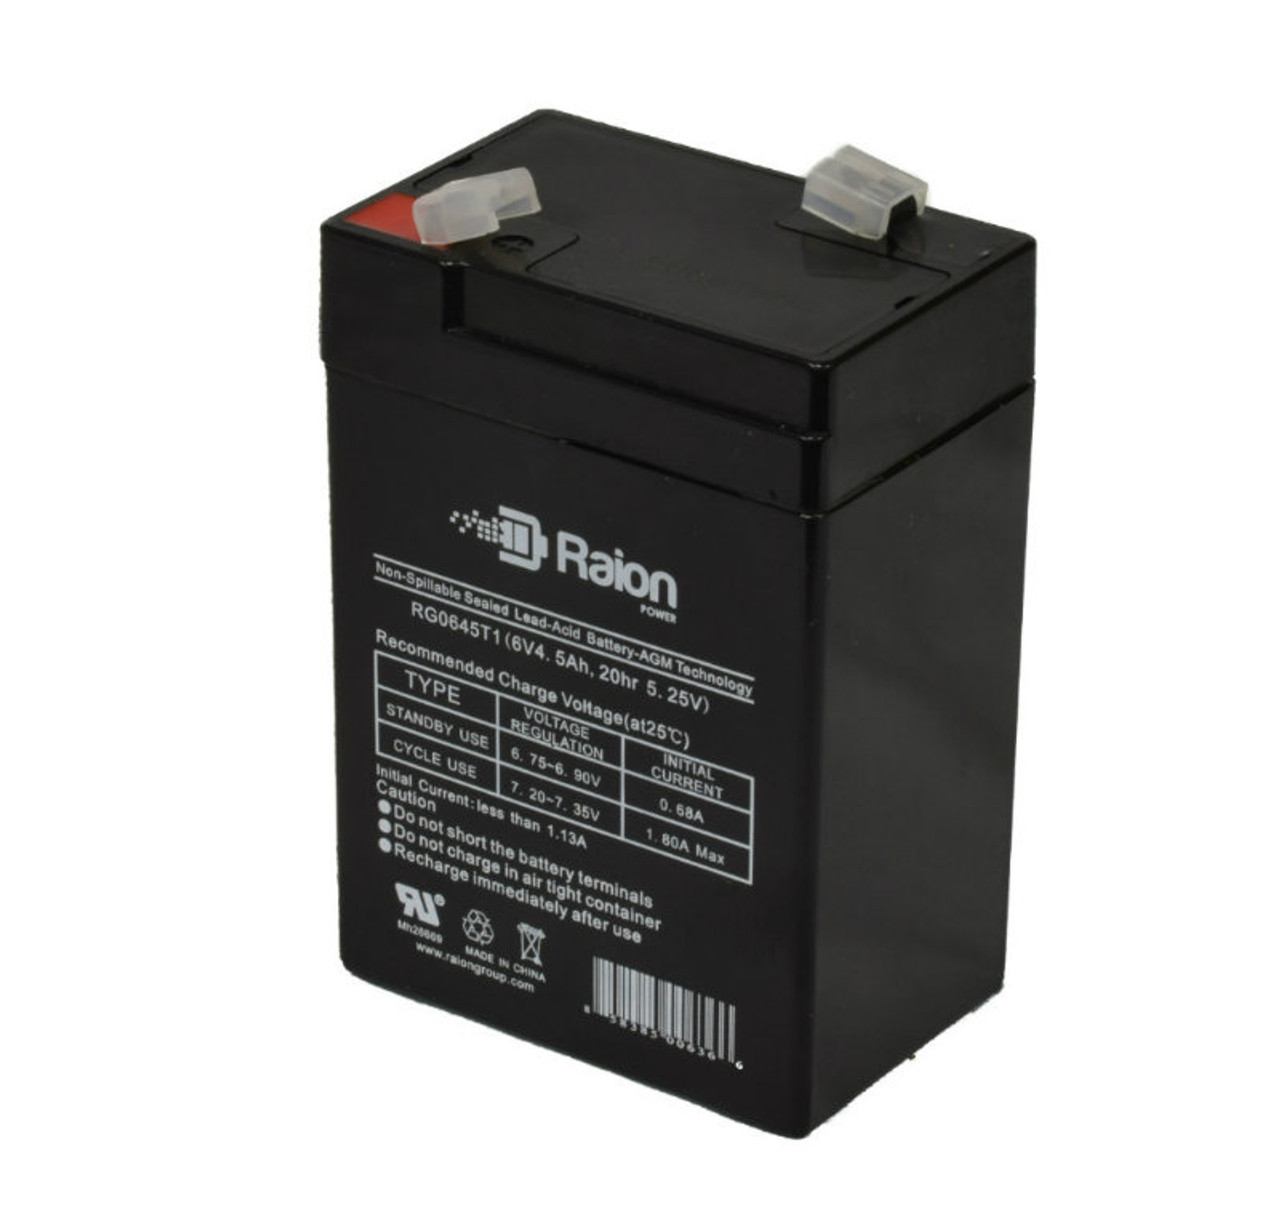 Raion Power RG0645T1 6V 4.5Ah Replacement Battery Cartridge for Tianchang TC6-4.5